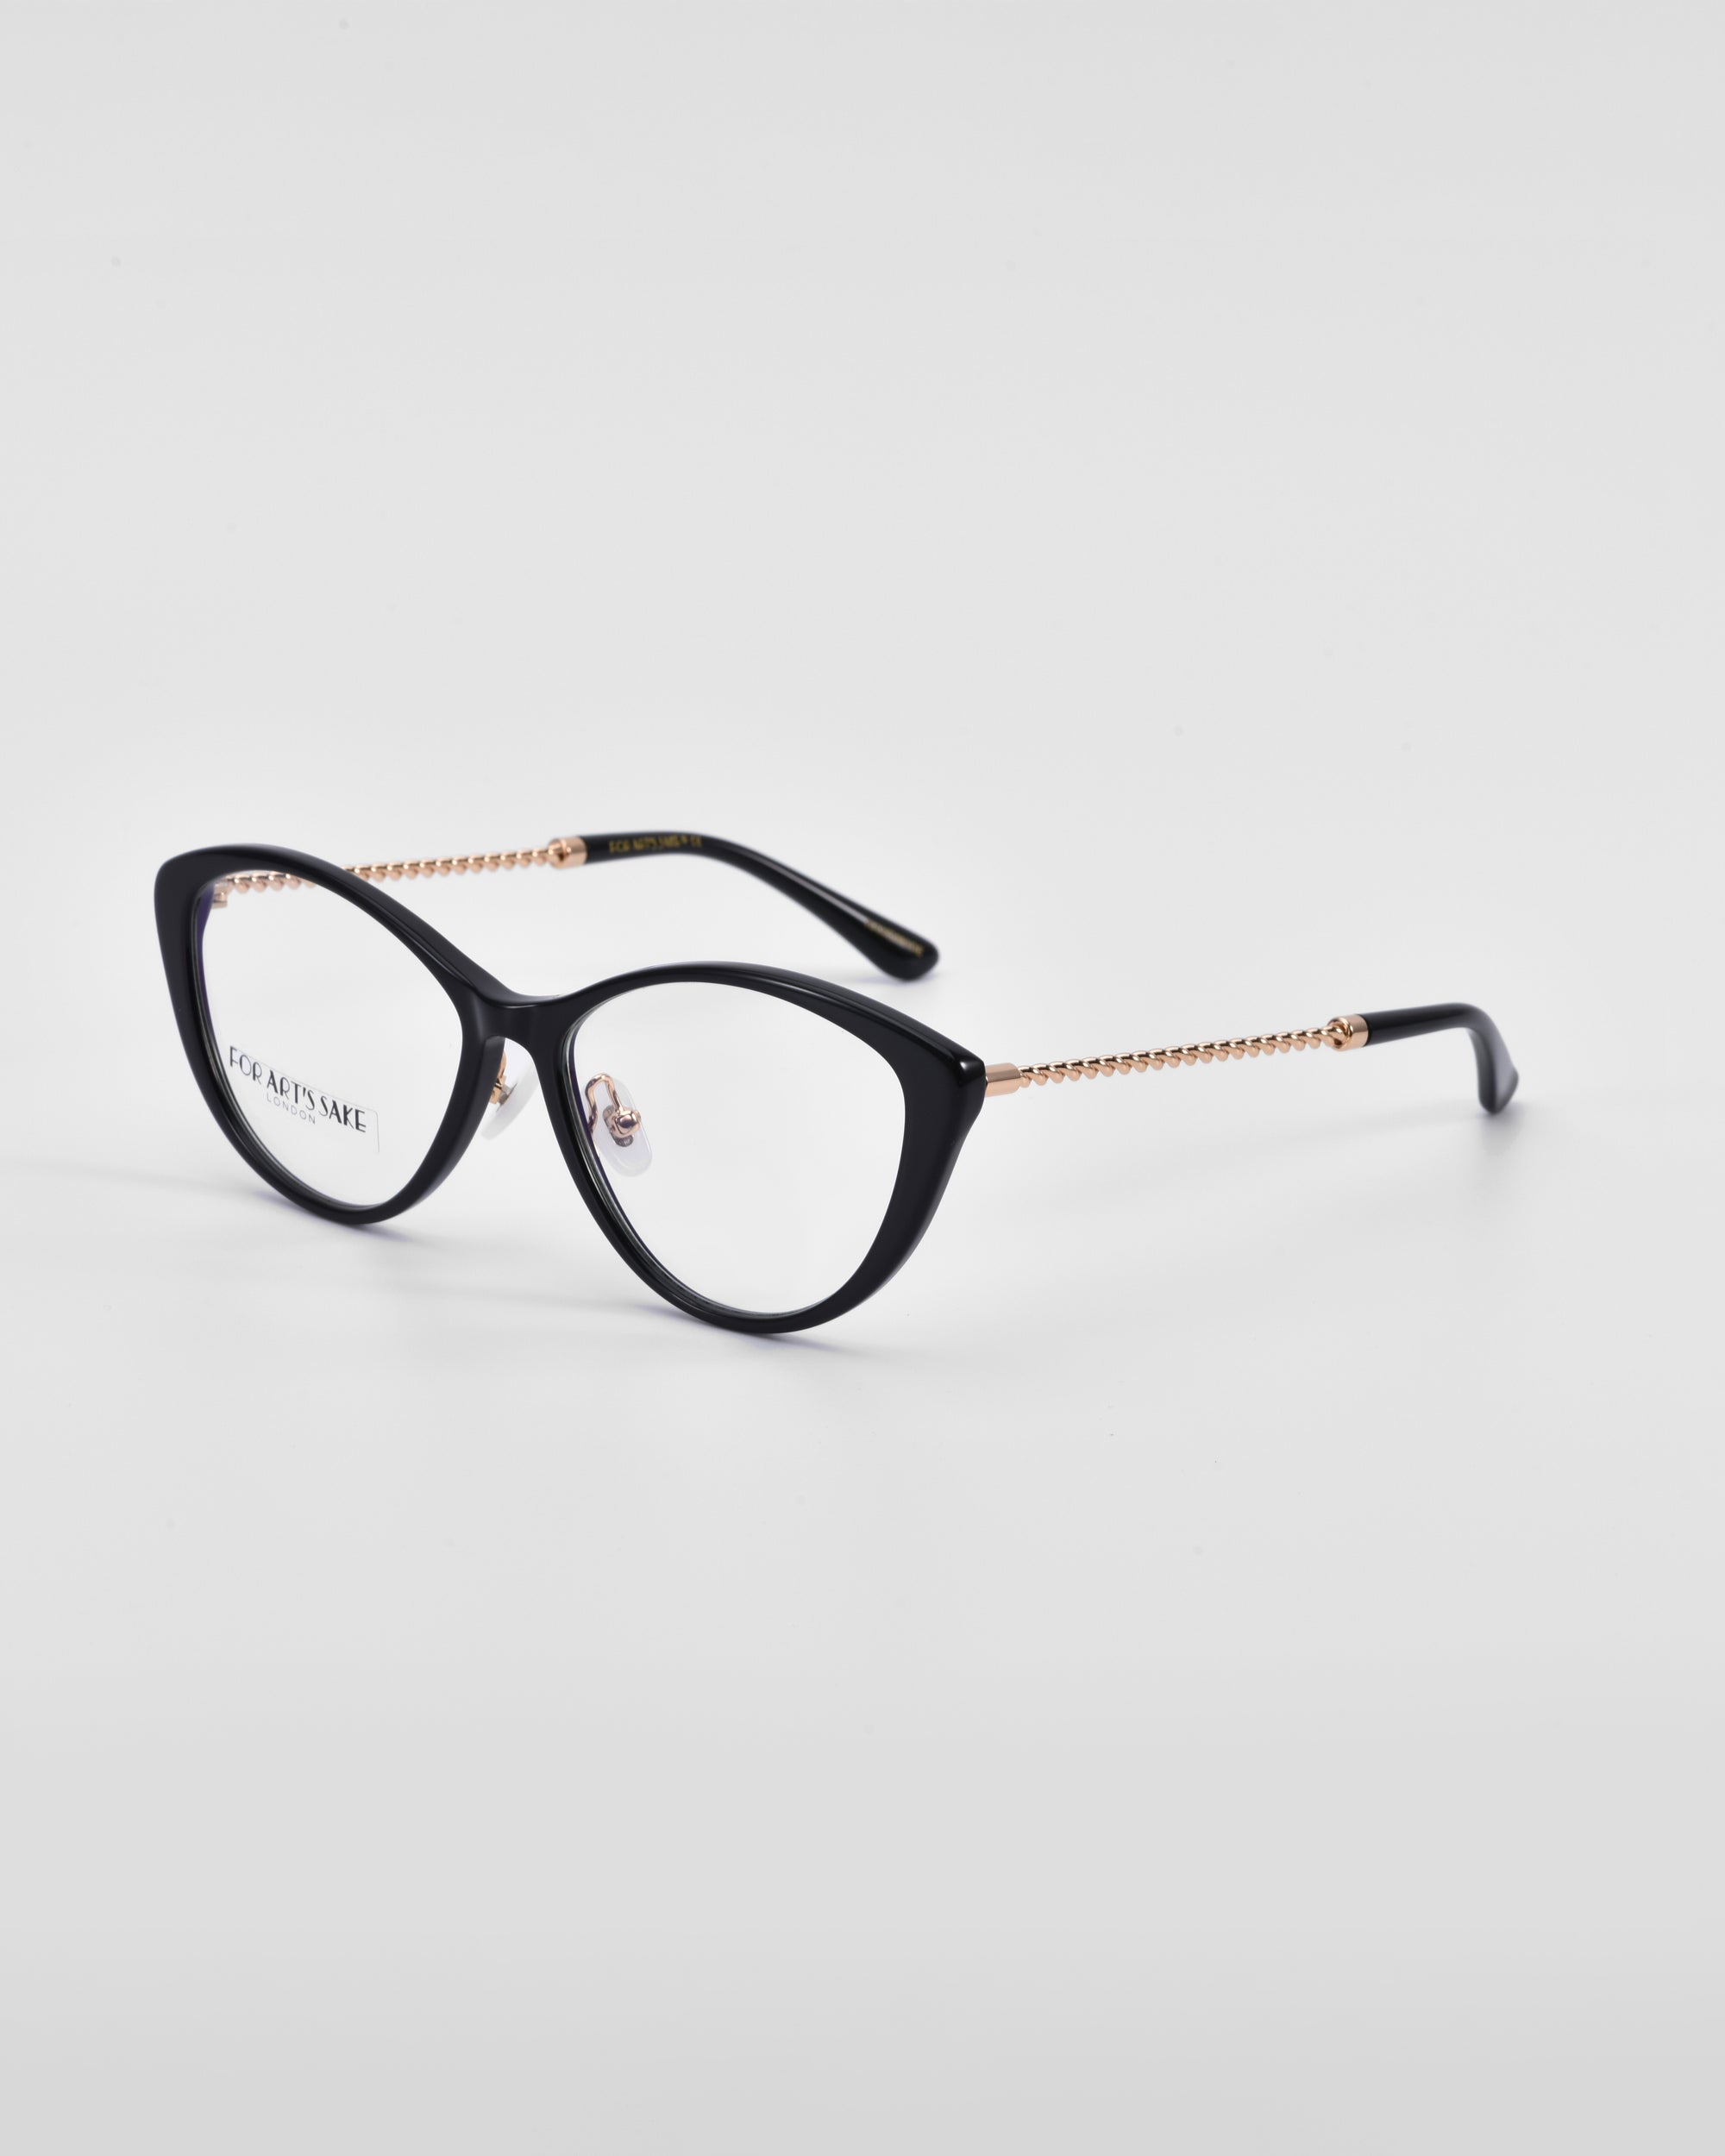 A pair of For Art's Sake® Perla II black cat-eye glasses with gold temple arms is placed on a white surface. The glasses have clear lenses, and the temple arms feature a beaded pattern and 18-karat gold plating, adding a touch of luxury to their optical design.